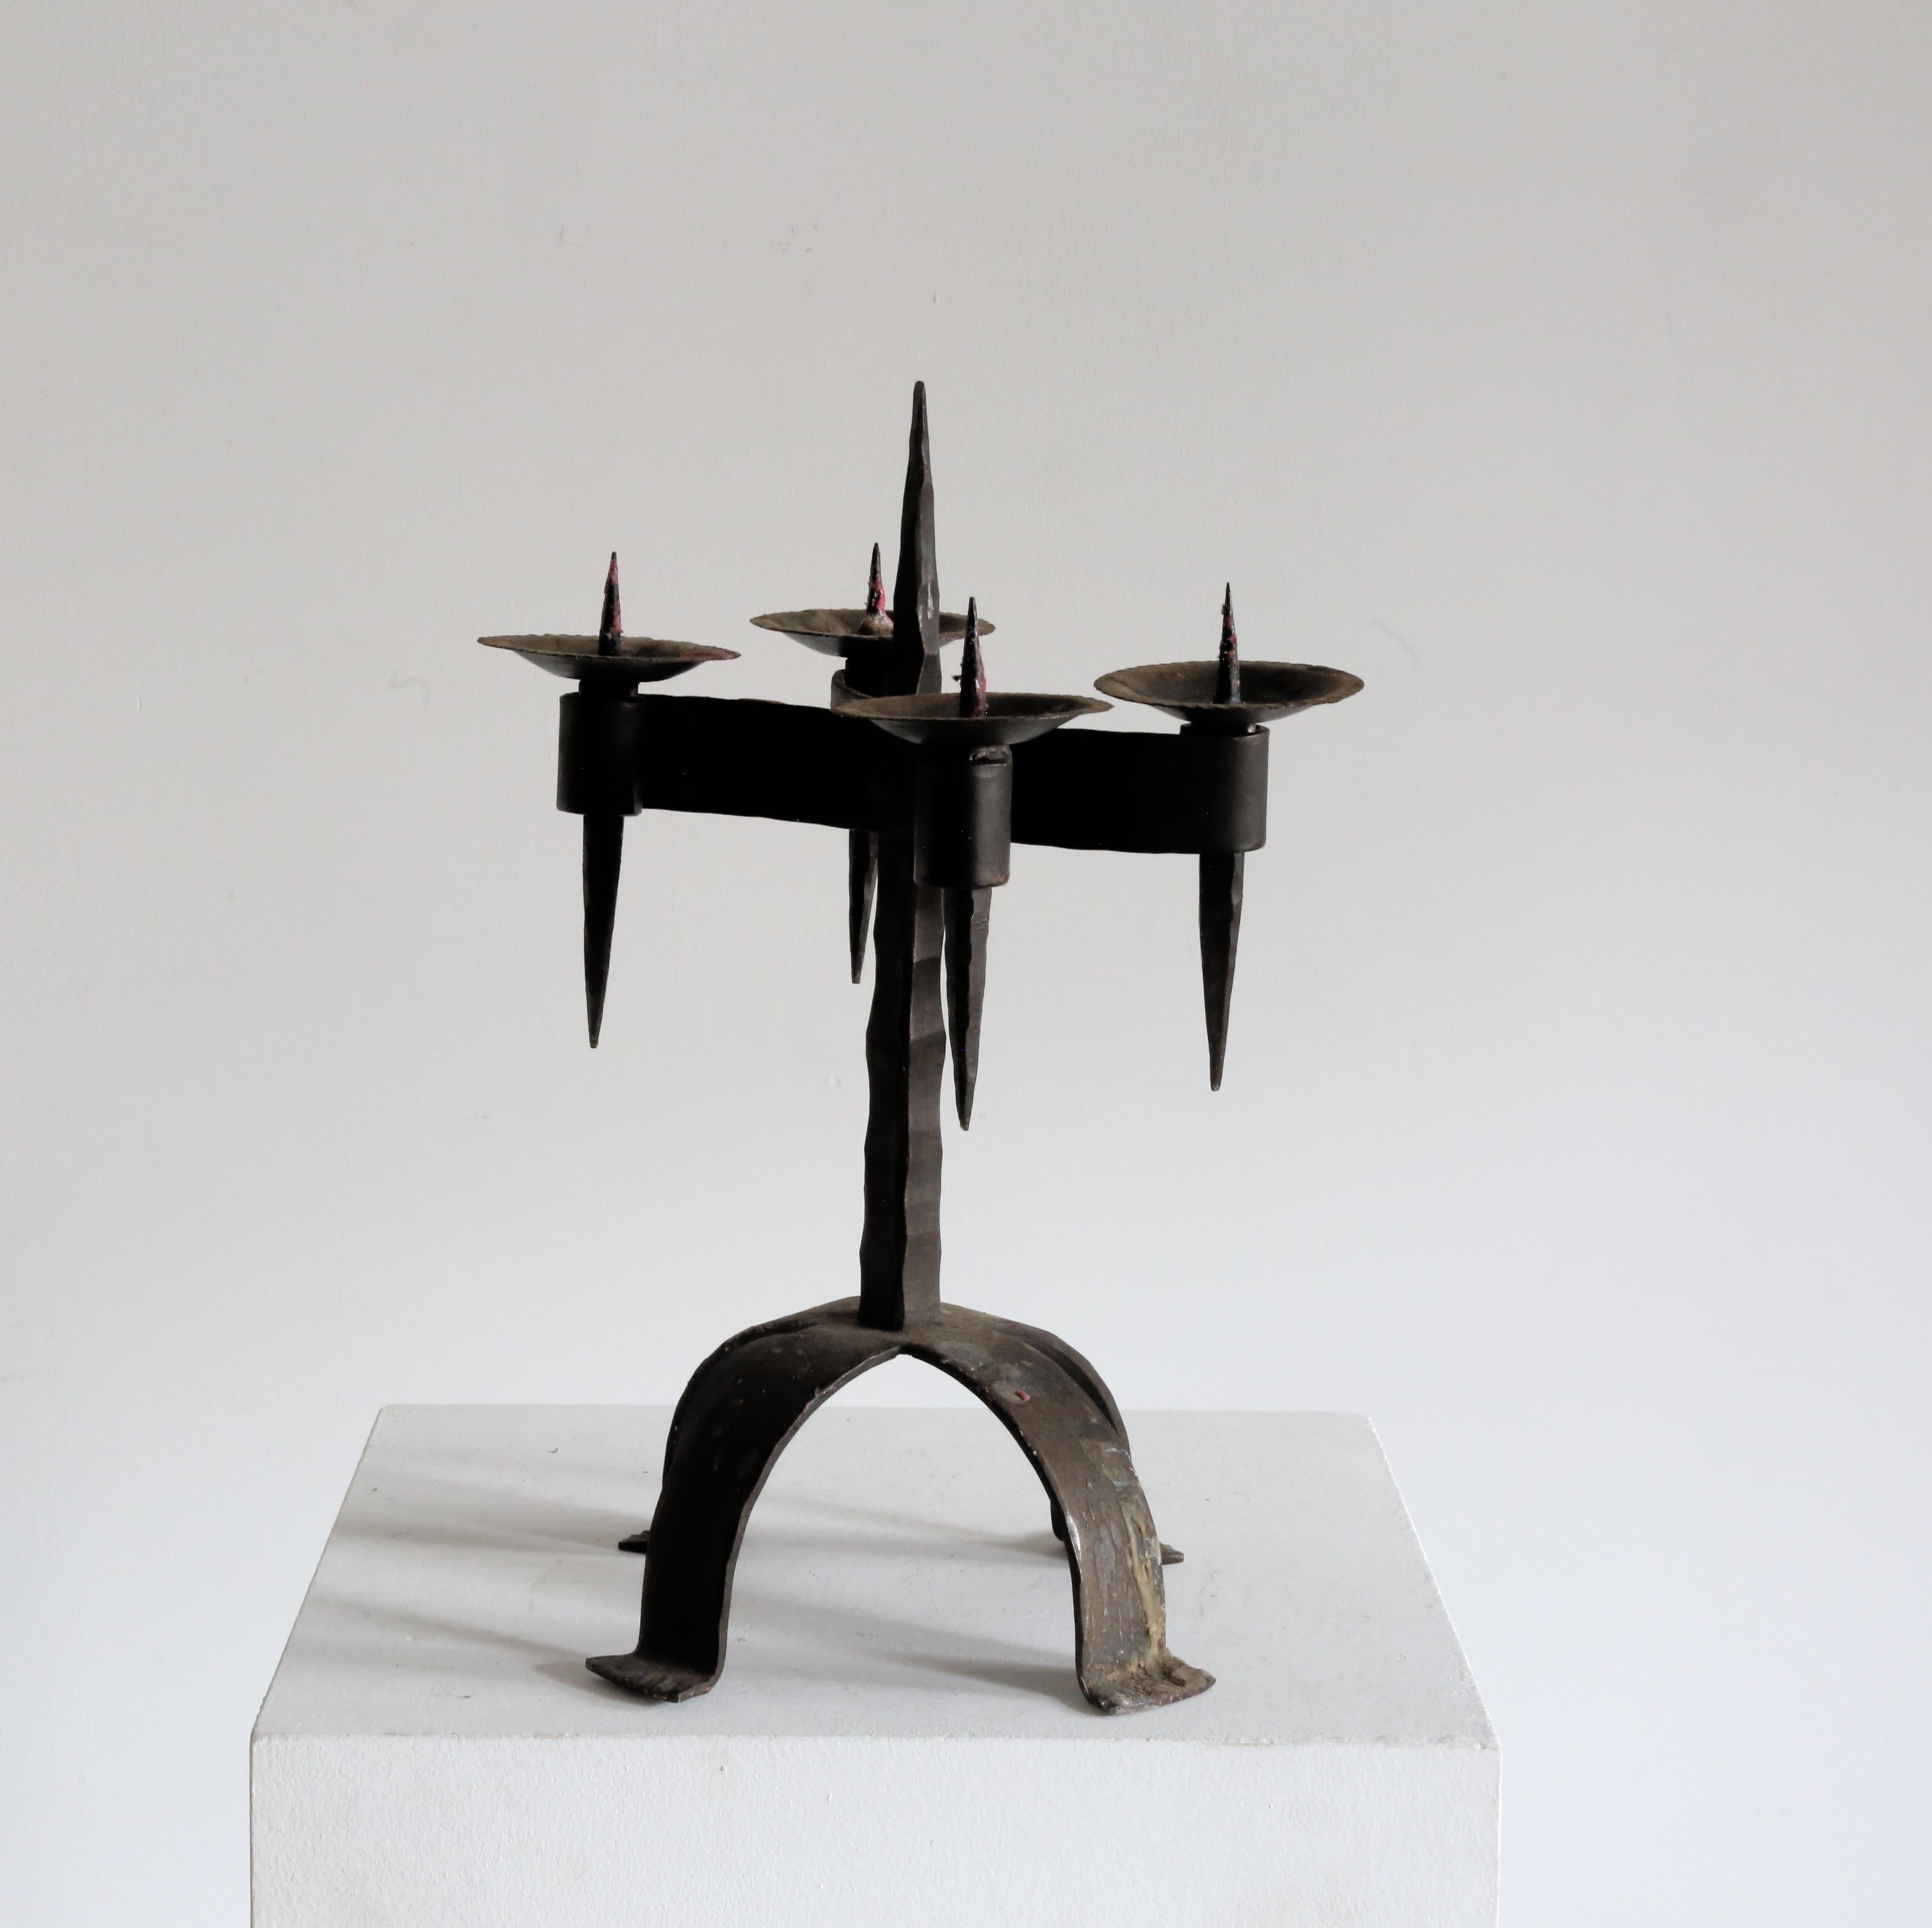 Hand-forged Blacksmith made brutalist candelabra. 

Each individual holder is detachable from the stand, for guiding oneself around the castle grounds at night!

France 1960s 